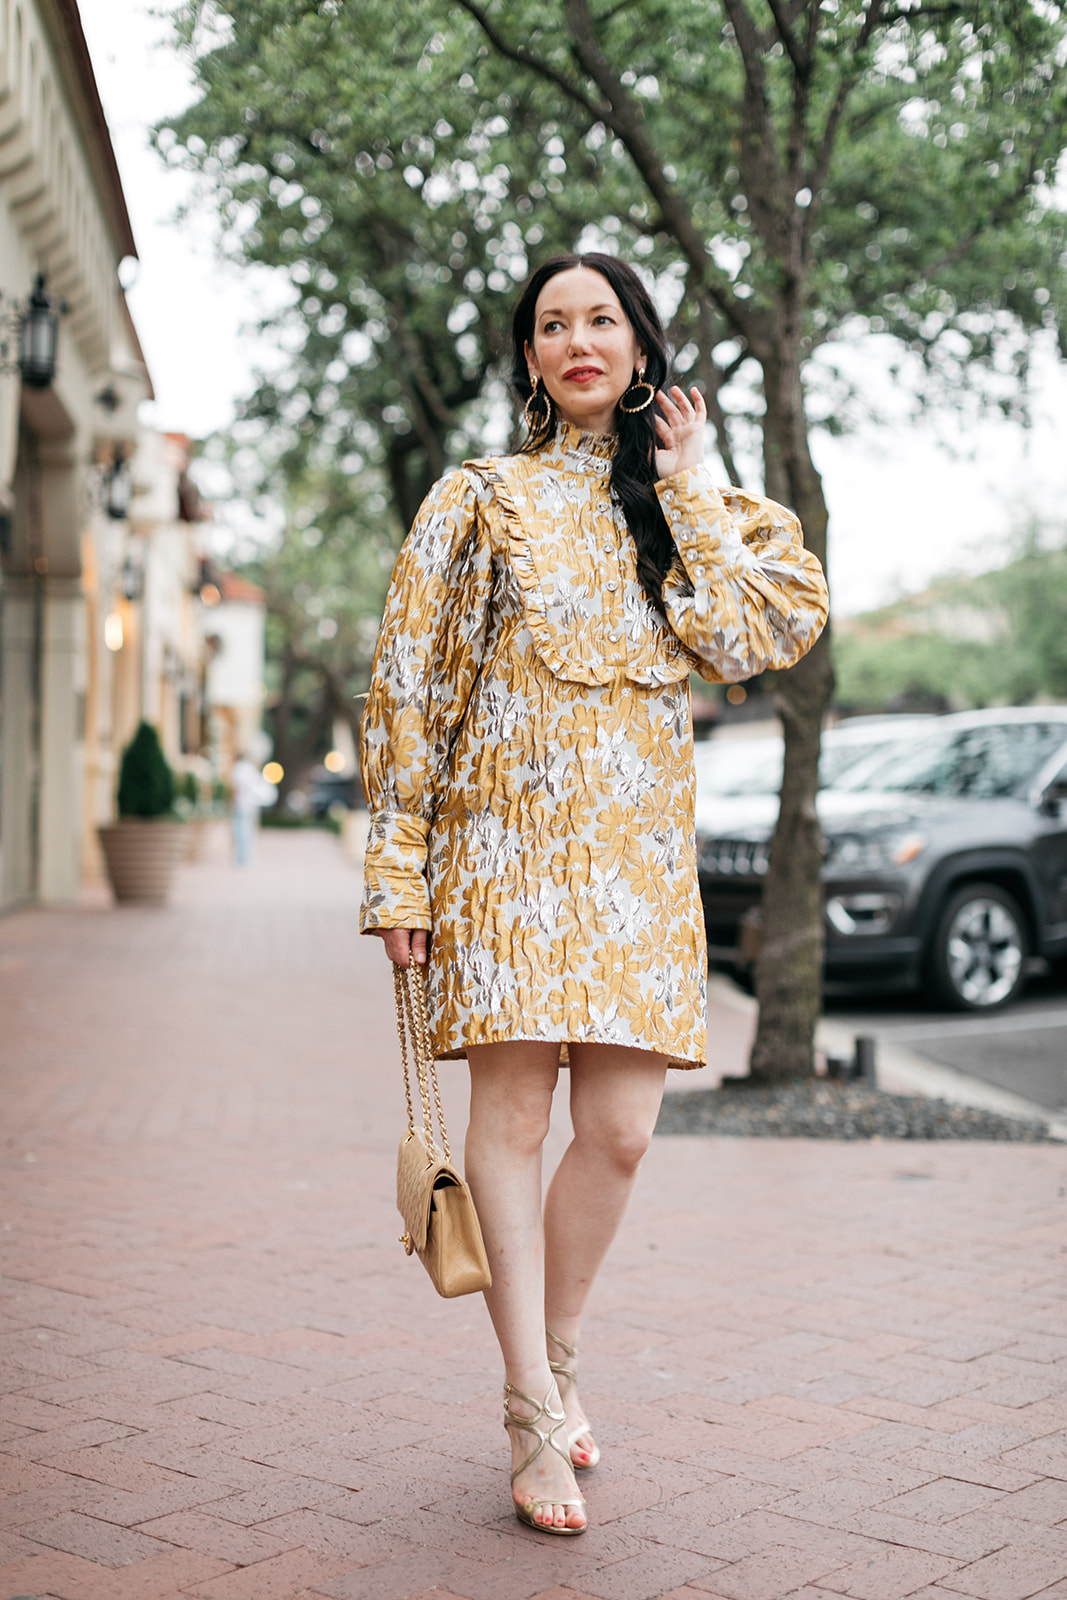 Sister Jane Cocktail Dress, Ettika Statement Earrigns | Cocktail Dress by popular Dallas fashion blog, Pretty Little Shoppers: image of a woman walking outside on a brick paved sidewalk and wearing a Sister Jane Cocktail Dress, Chanel Bag, Jimmy Choo Sandals, and Ettika earrings.